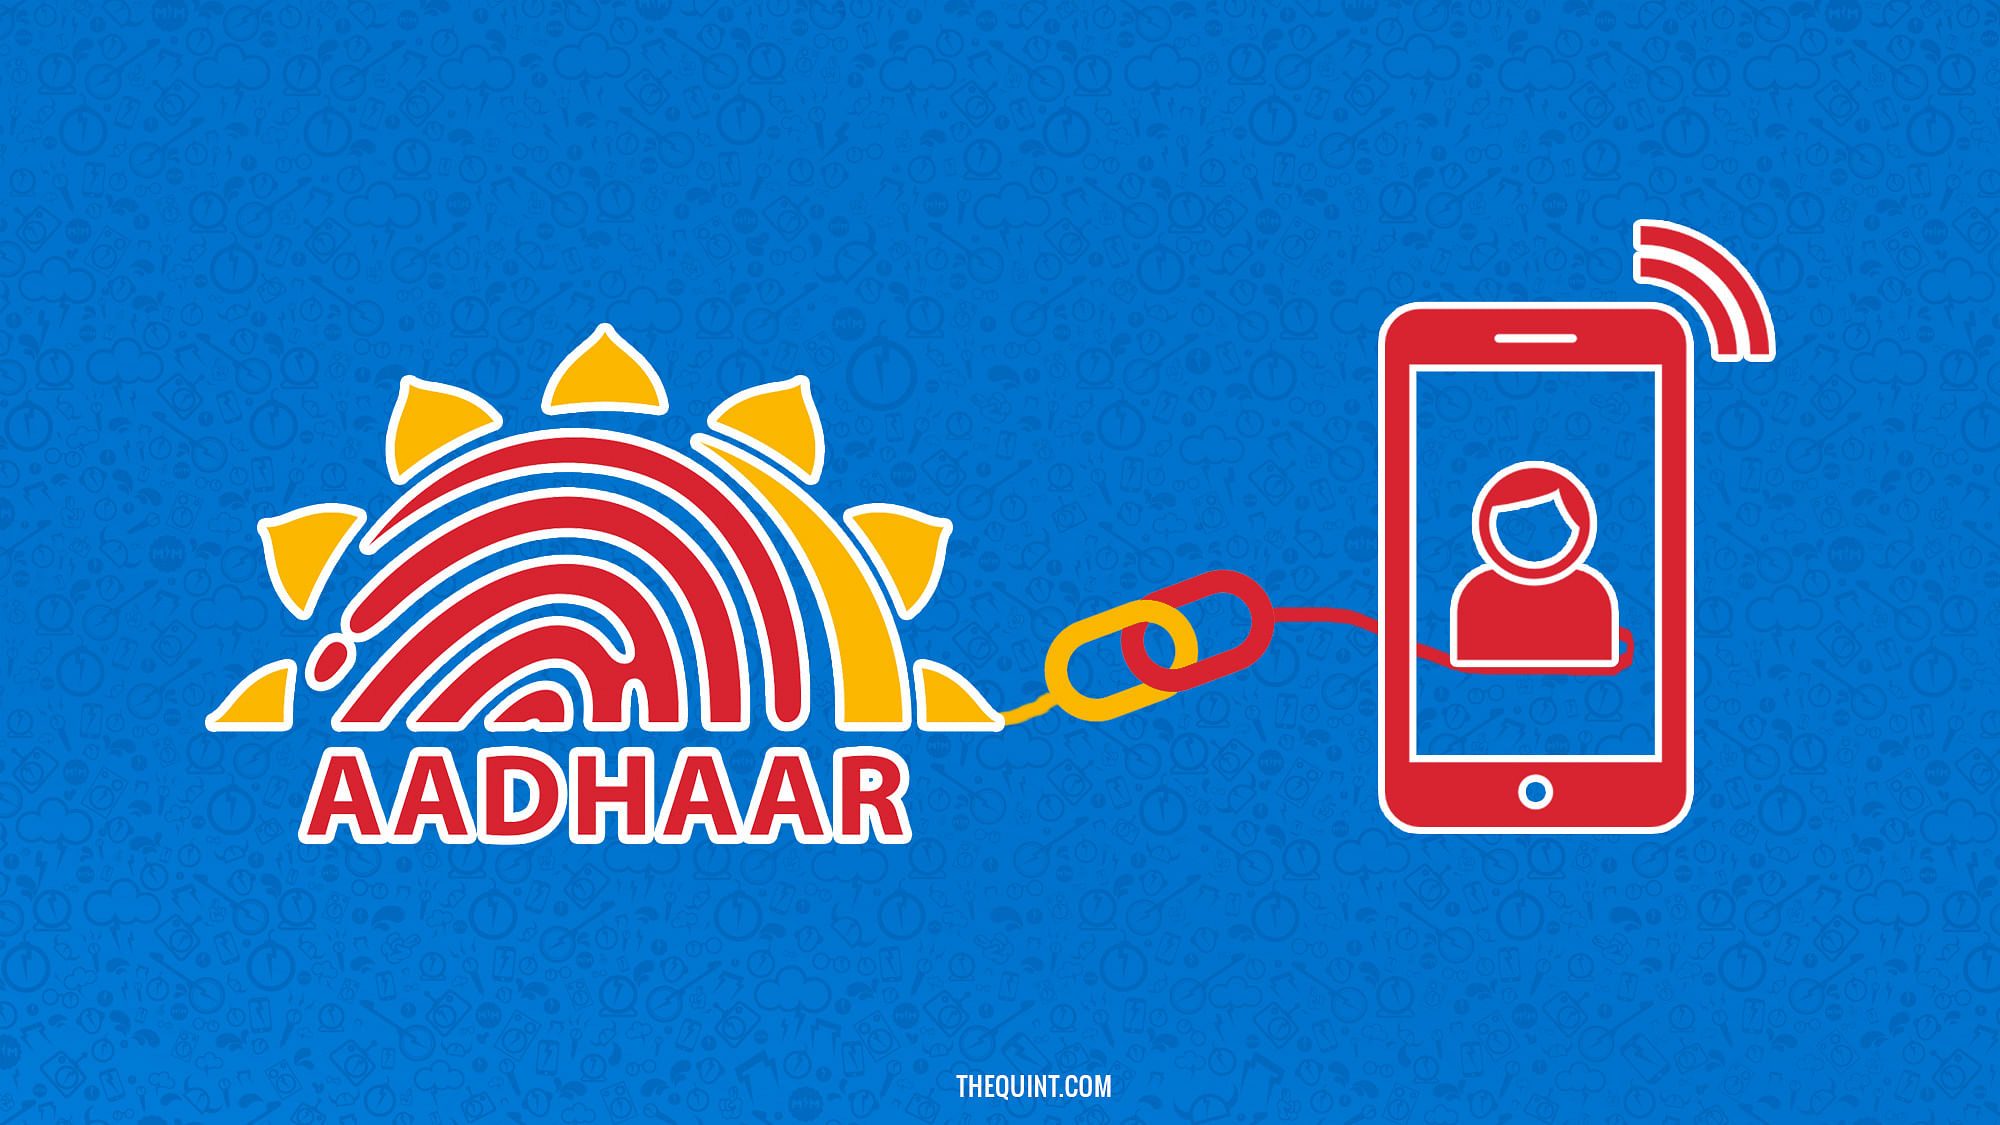 Telecom service providers cannot ask for linking mobile number with Aadhaar.